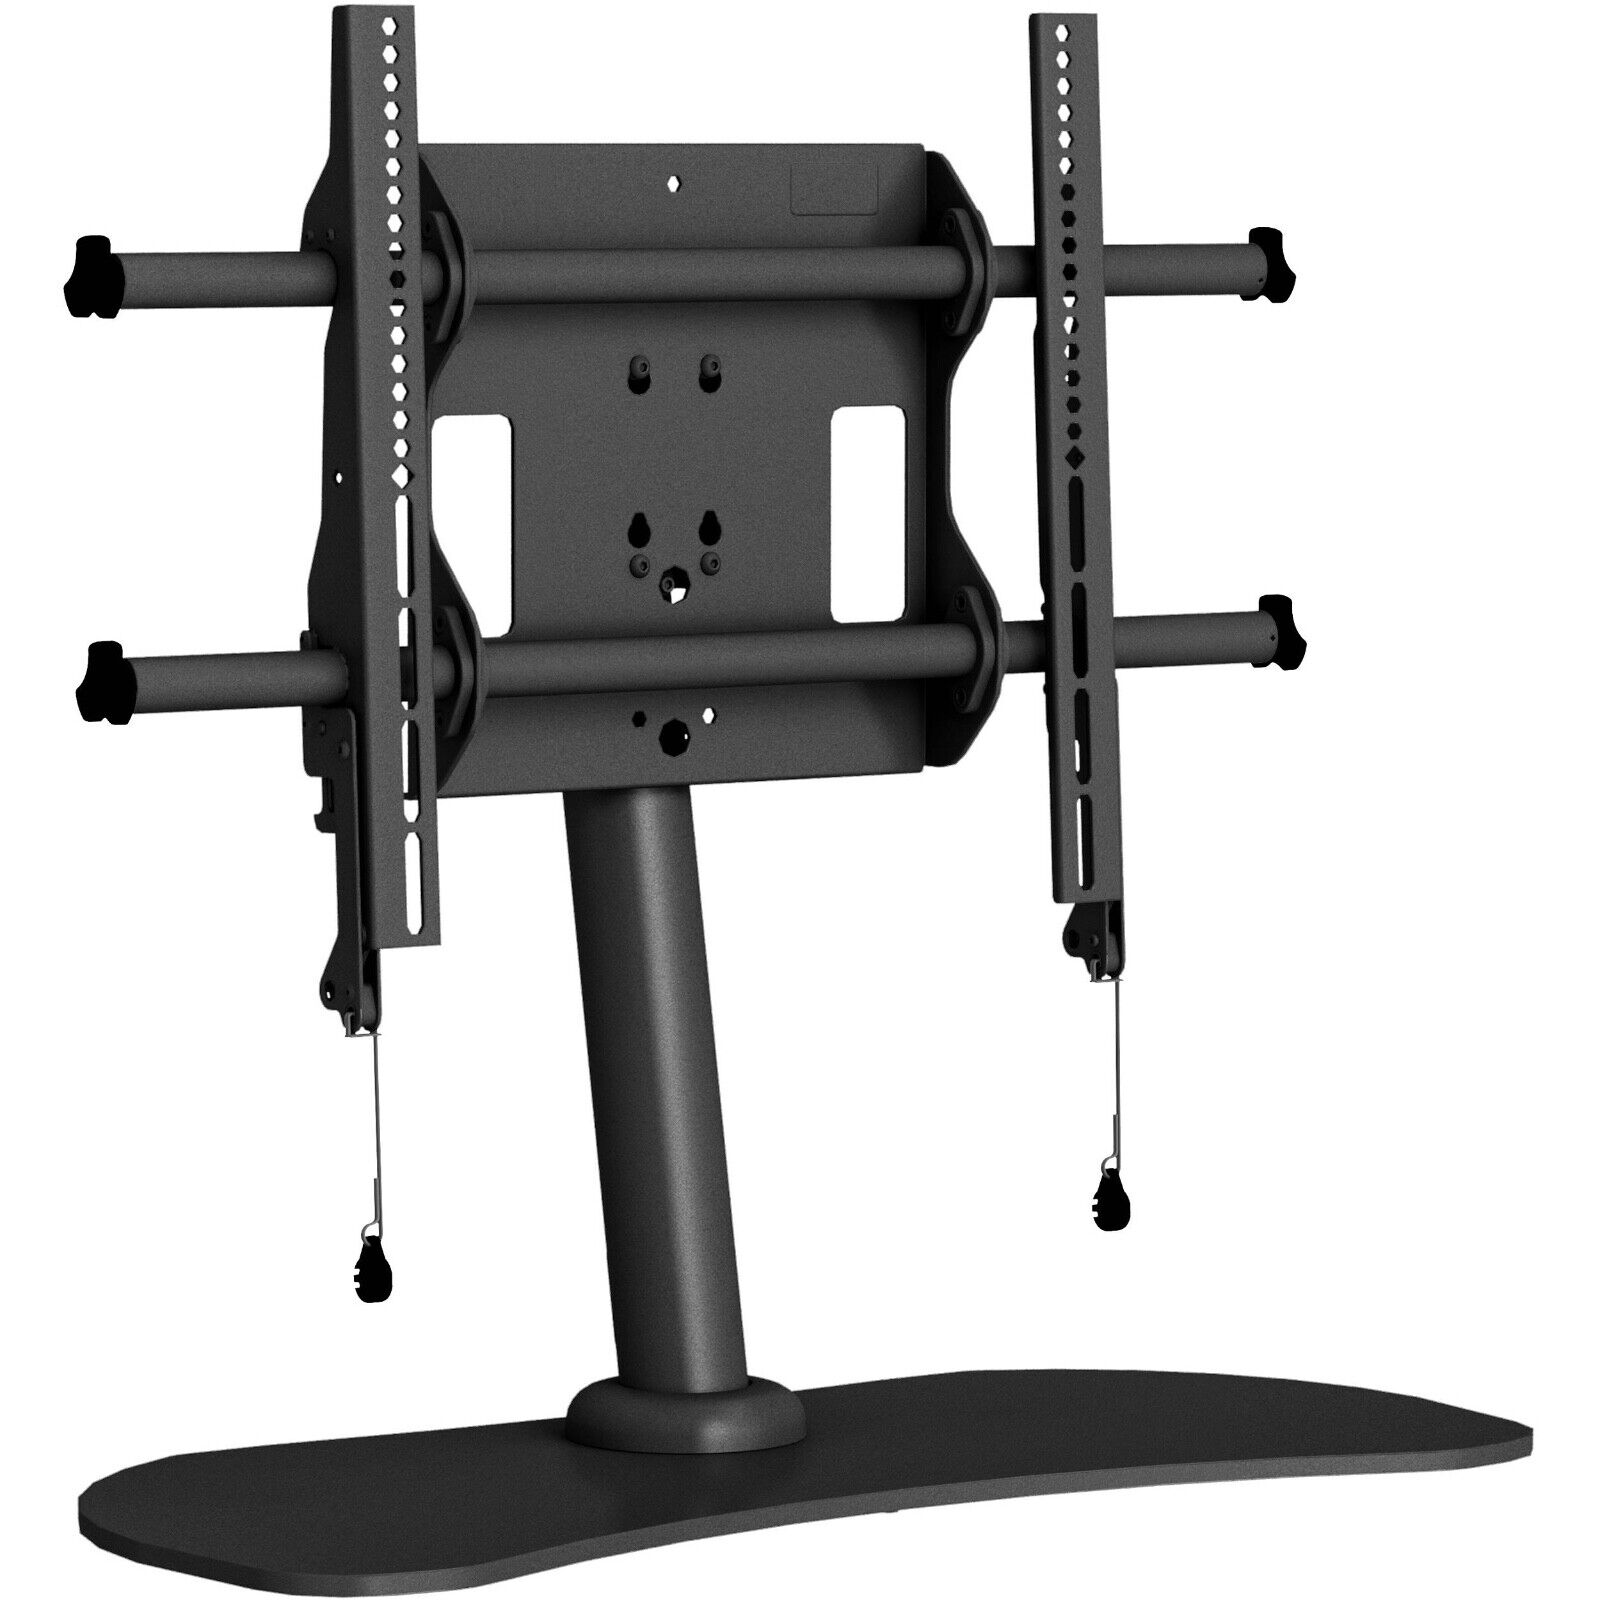 CHIEF LDS1U Large Fusion Flat Panel Table Stand For 46 to 70” Displays